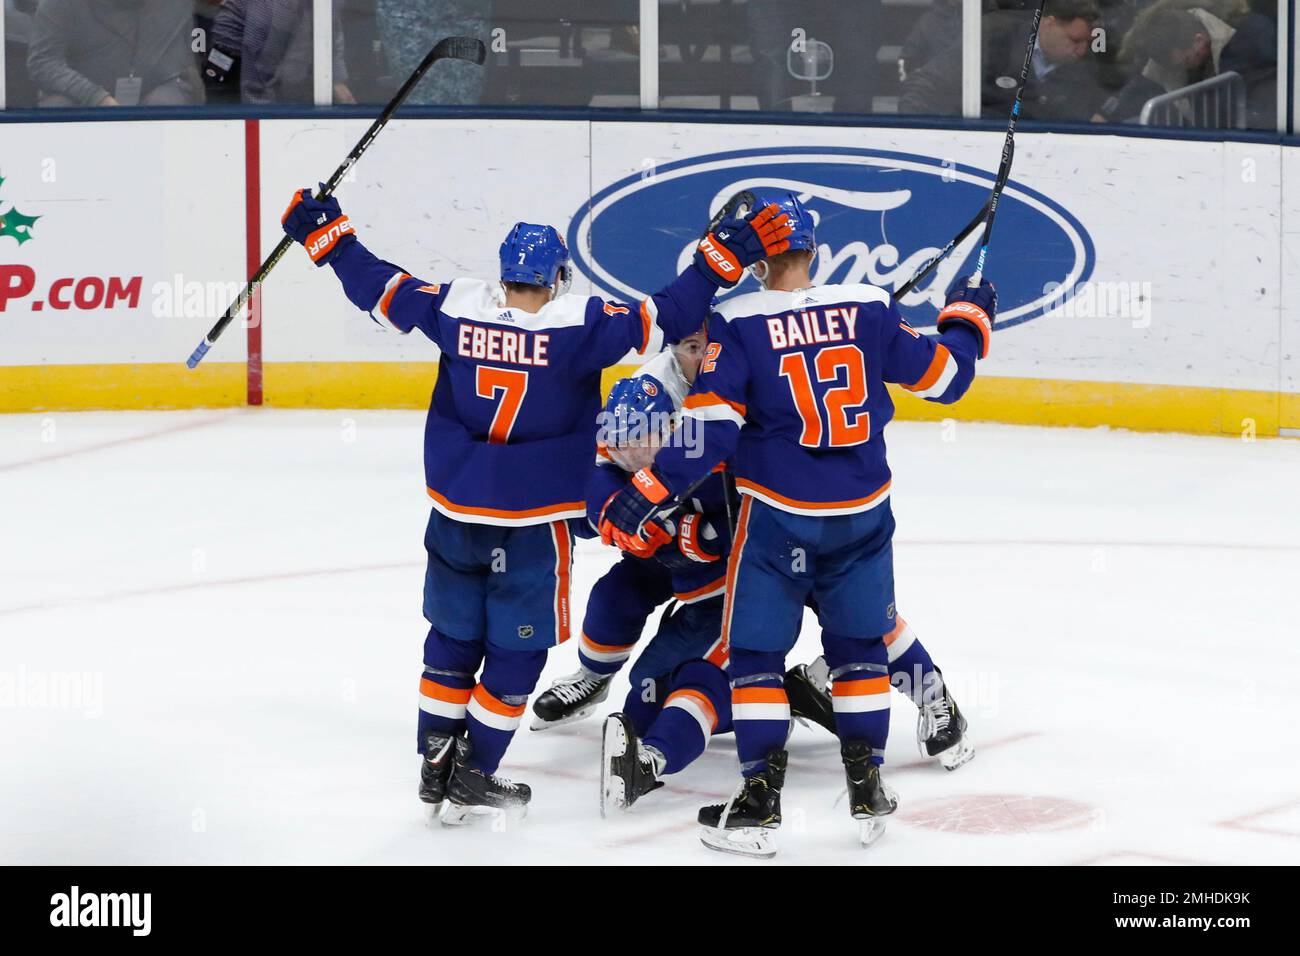 Jordan Eberle of the New York Islanders poses for his official